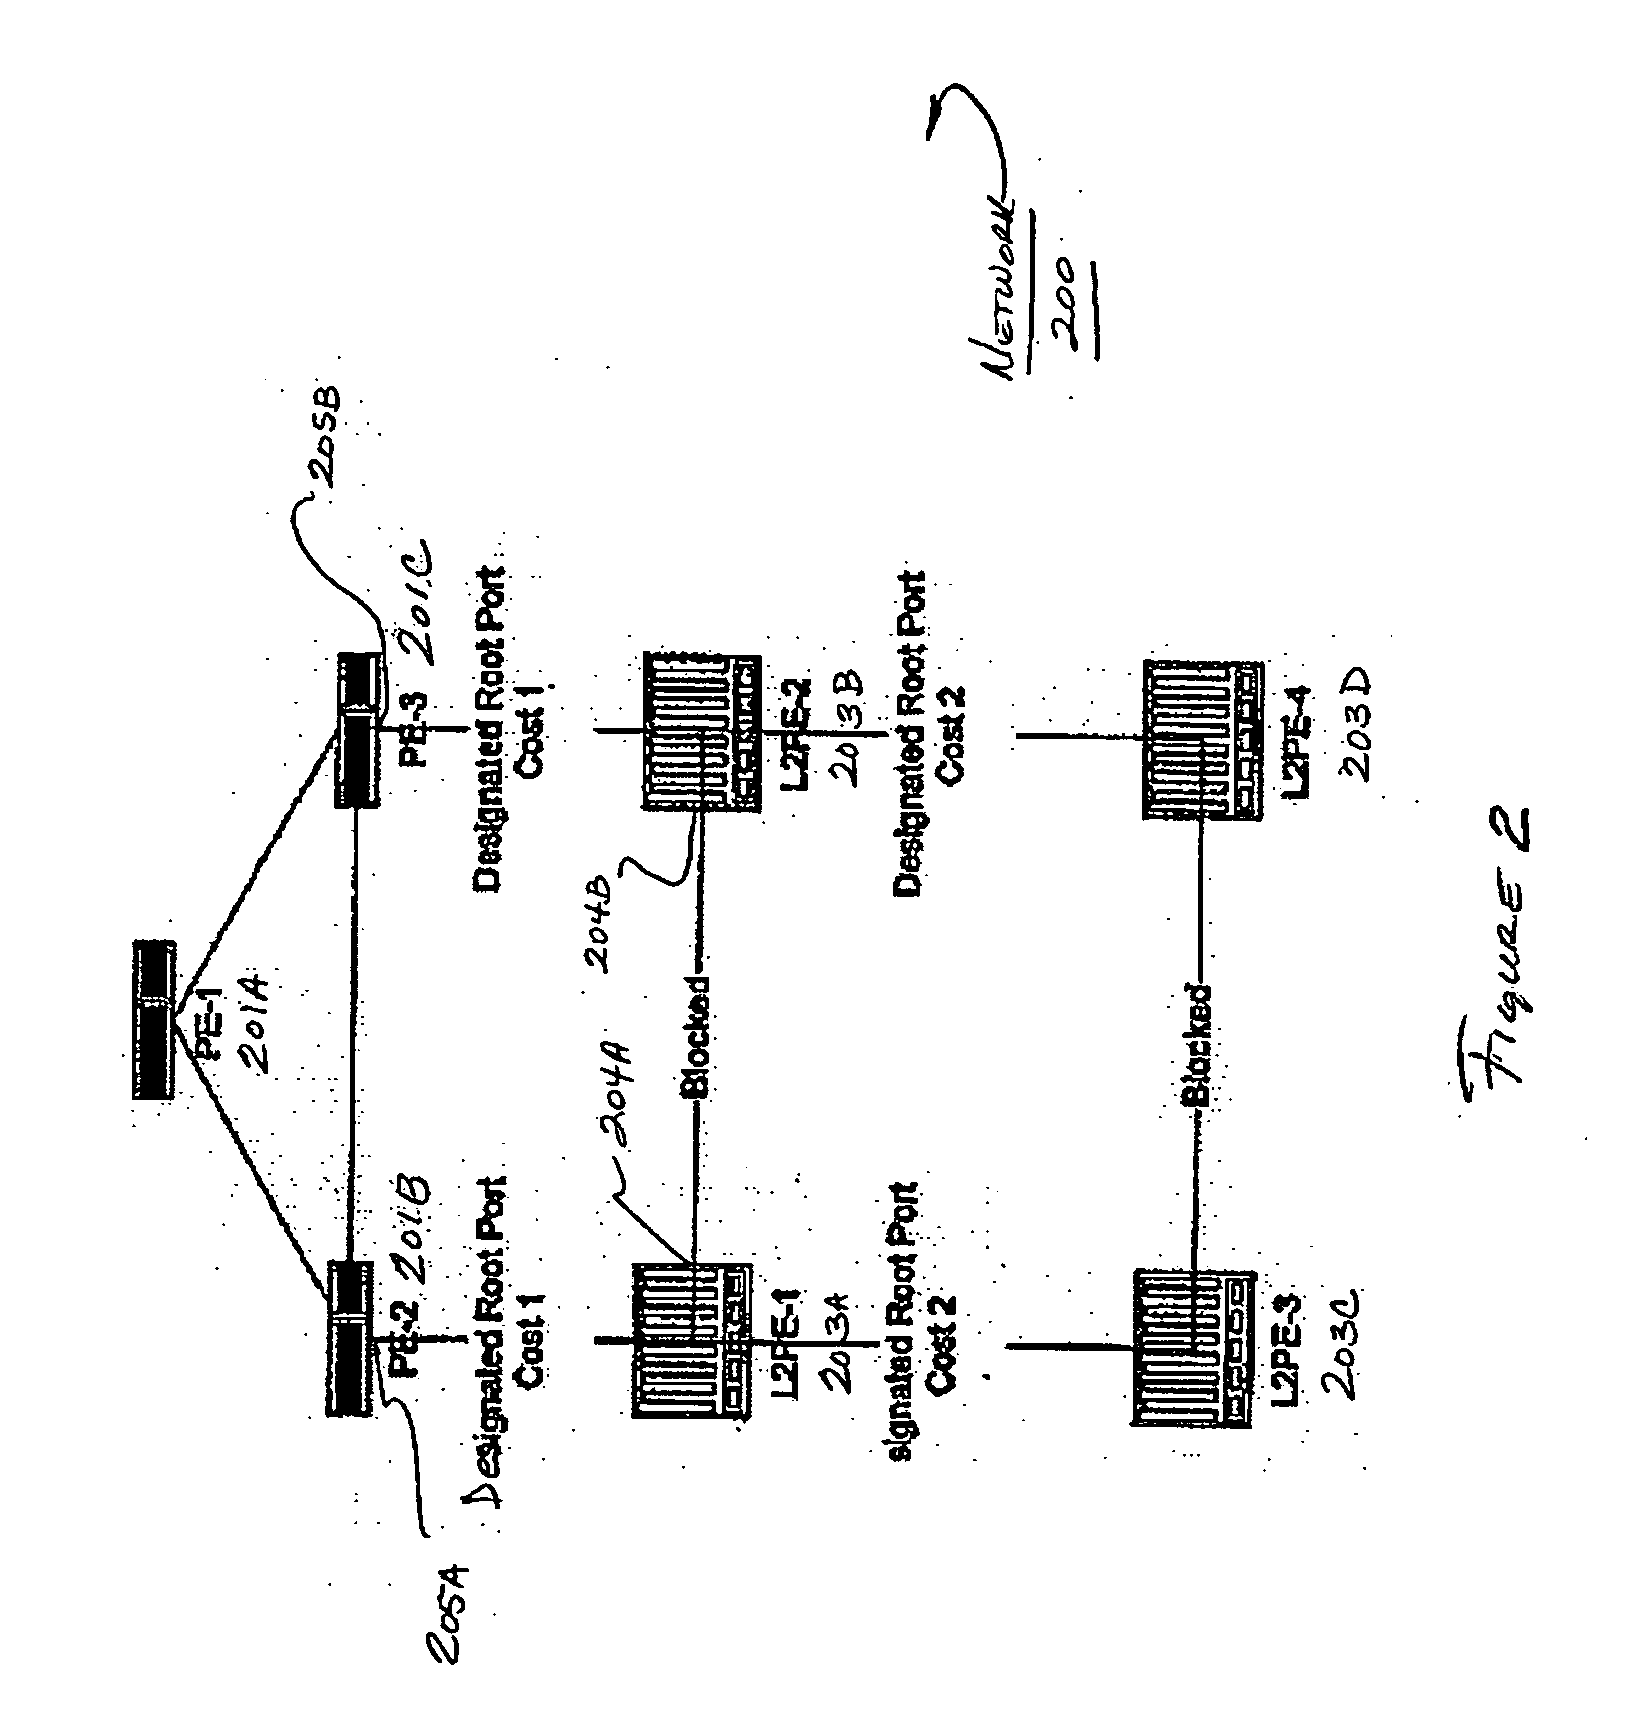 Method and apparatus for determining a spanning tree